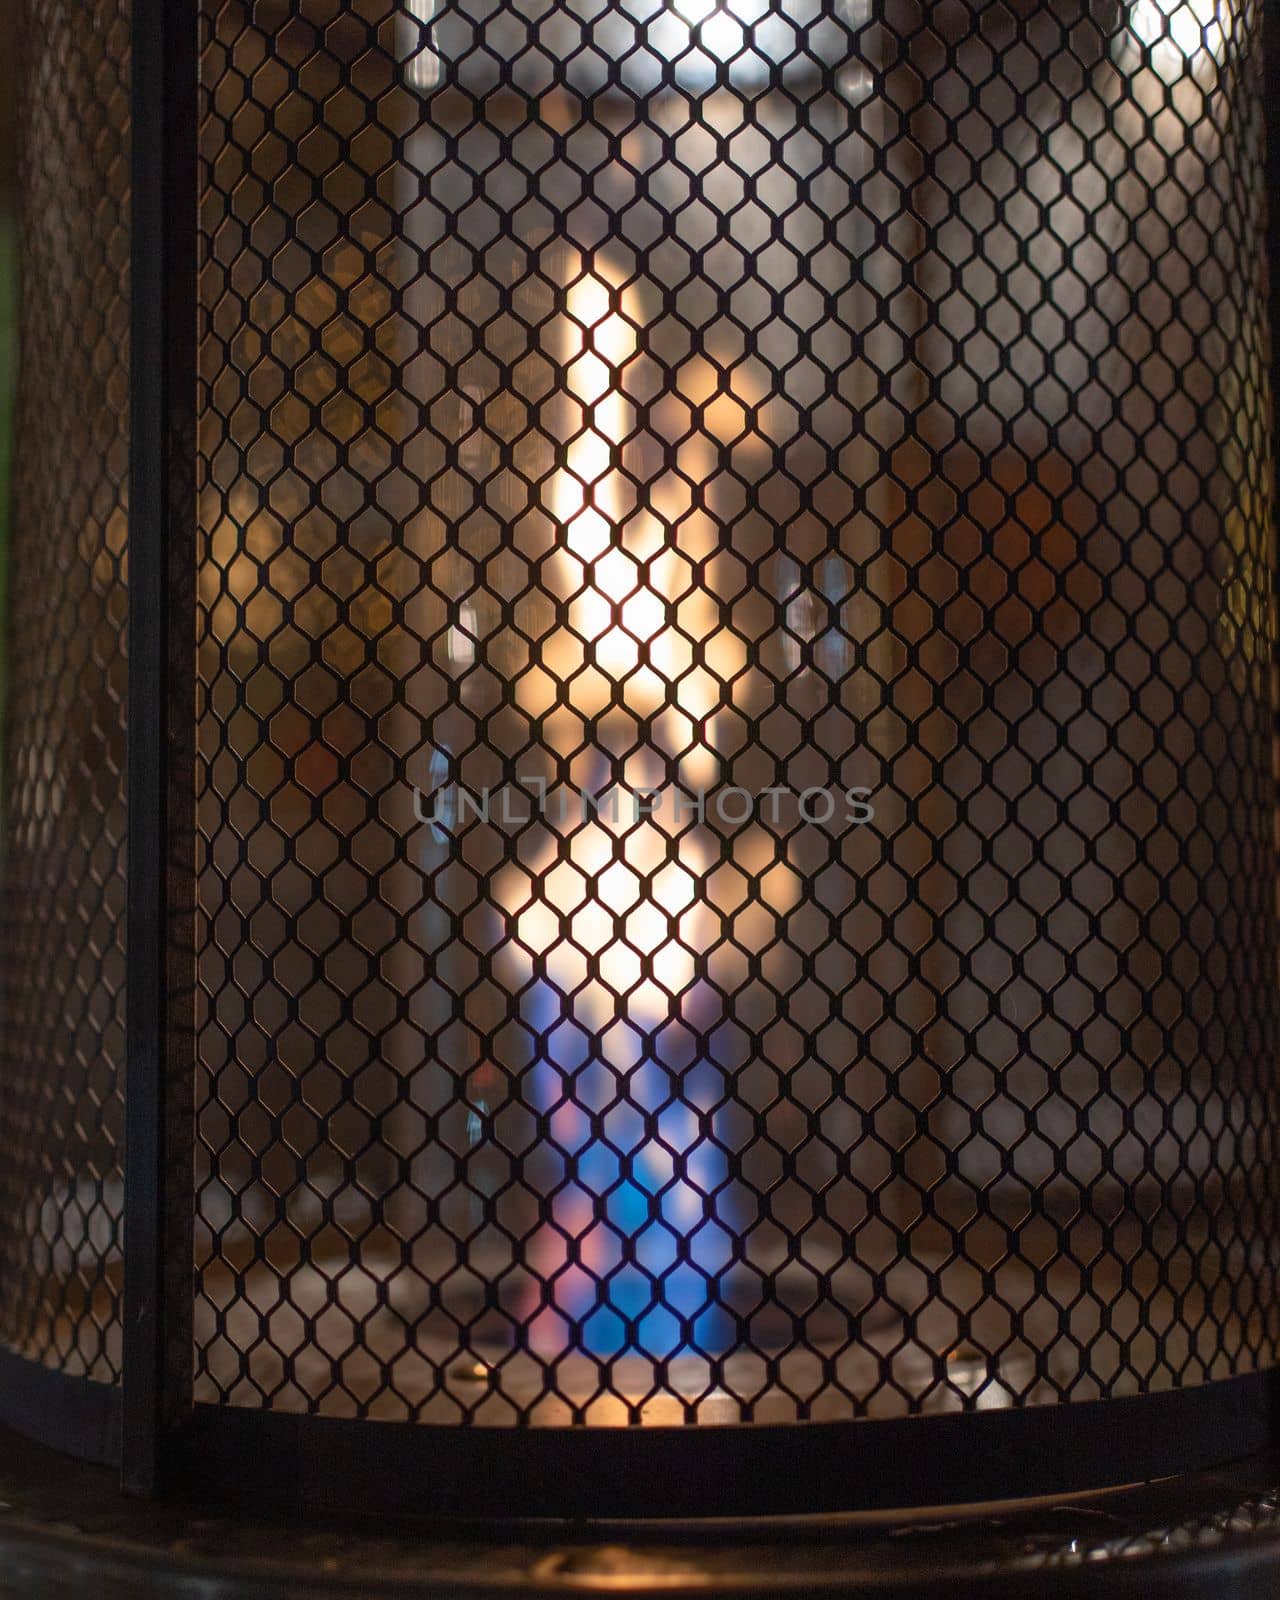 Close up of gas flame heater at night.